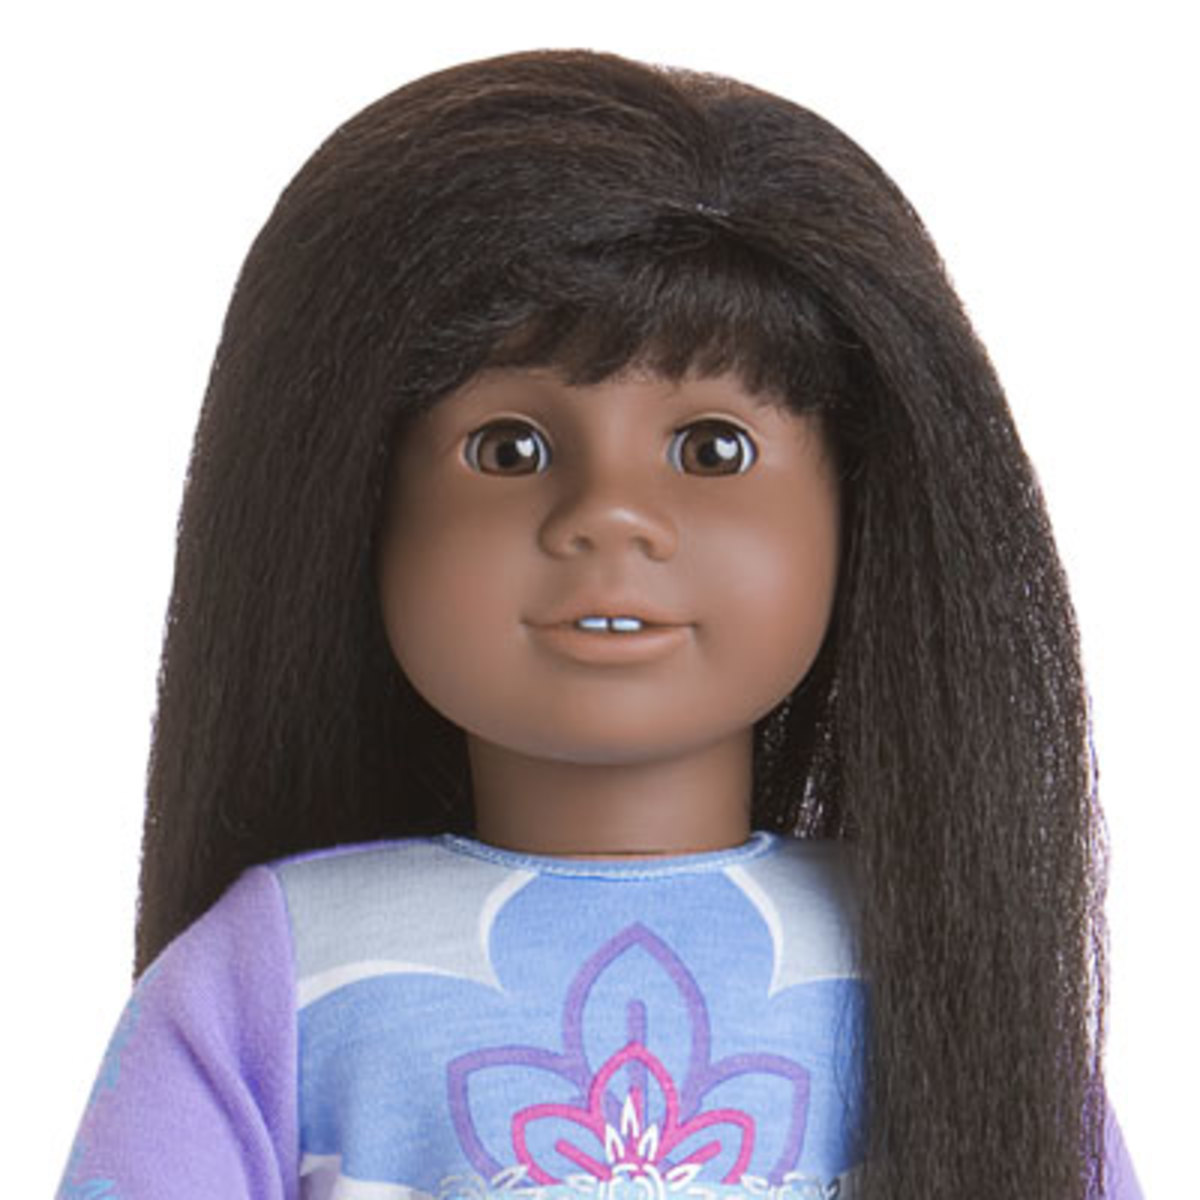 The Rarest American Girl Dolls Truly Me And Just Like You Hobbylark